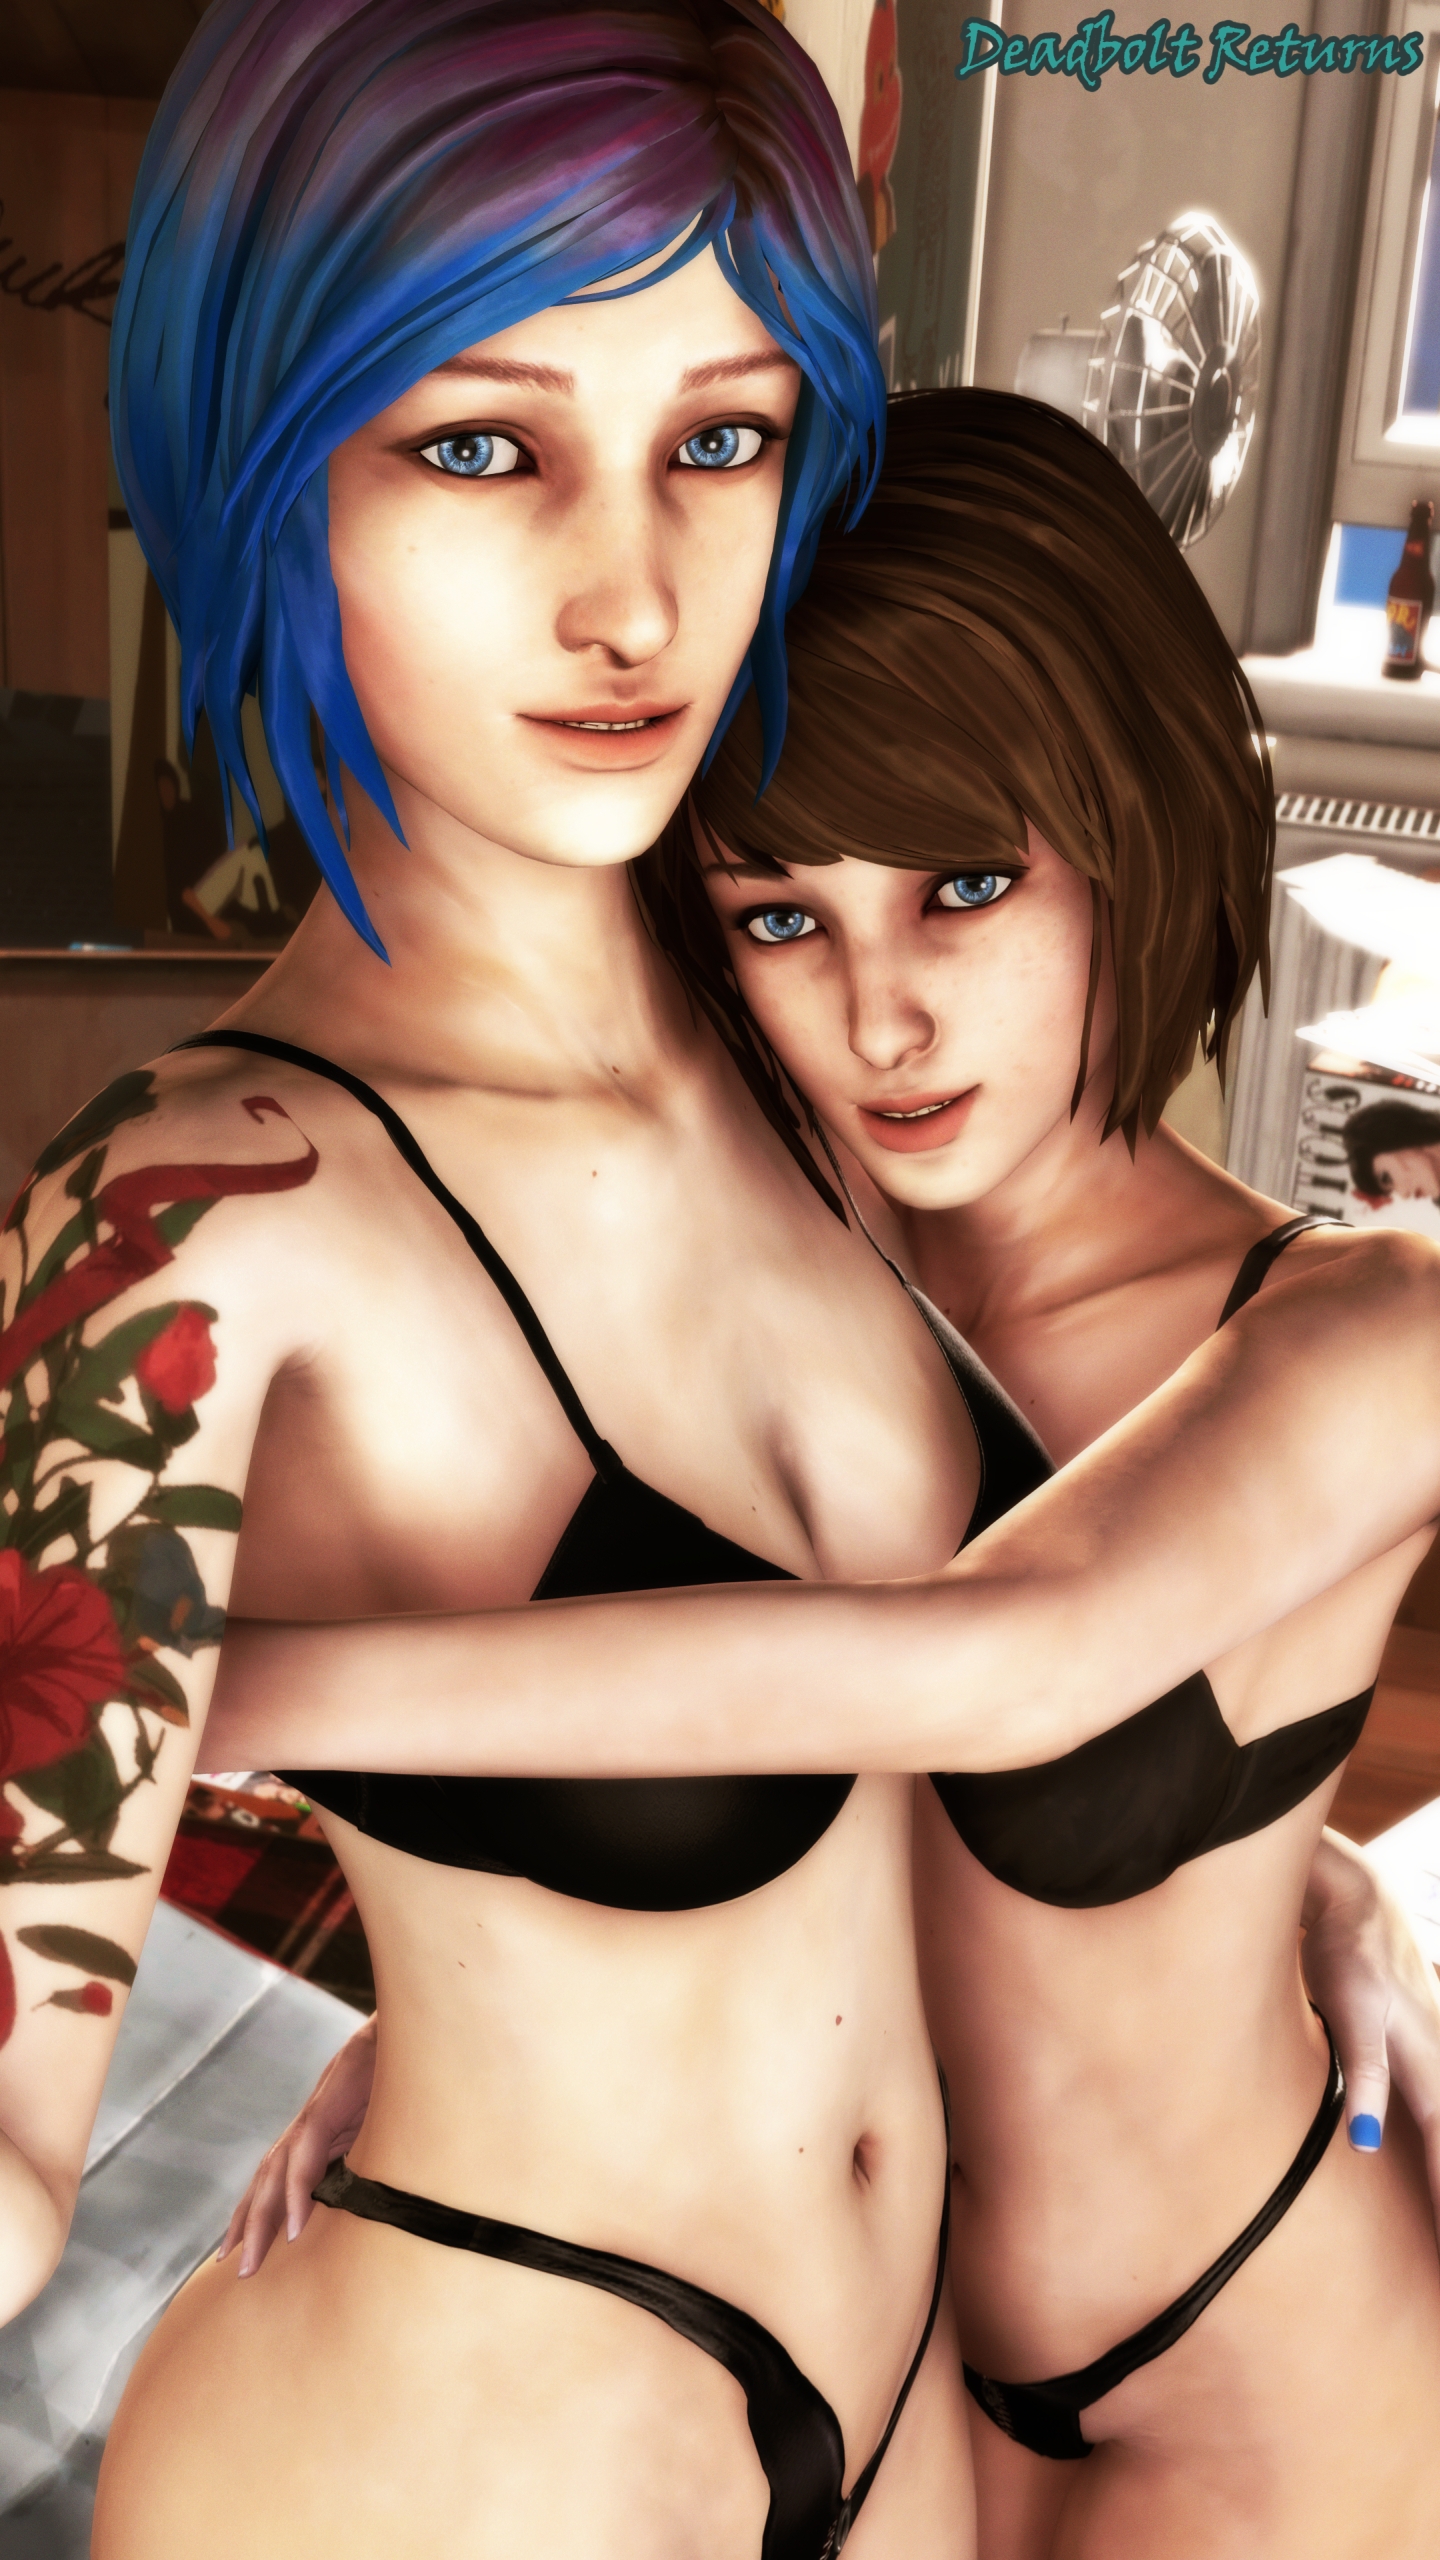 Max Caulfield and Chloe Price Selfie Threesome Max Caulfield Chloe Price Life Is Strange Life Is Strange Max Sfm Source Filmmaker Rule34 Rule 34 Nsfw 3dnsfw 3d Porn Threesome